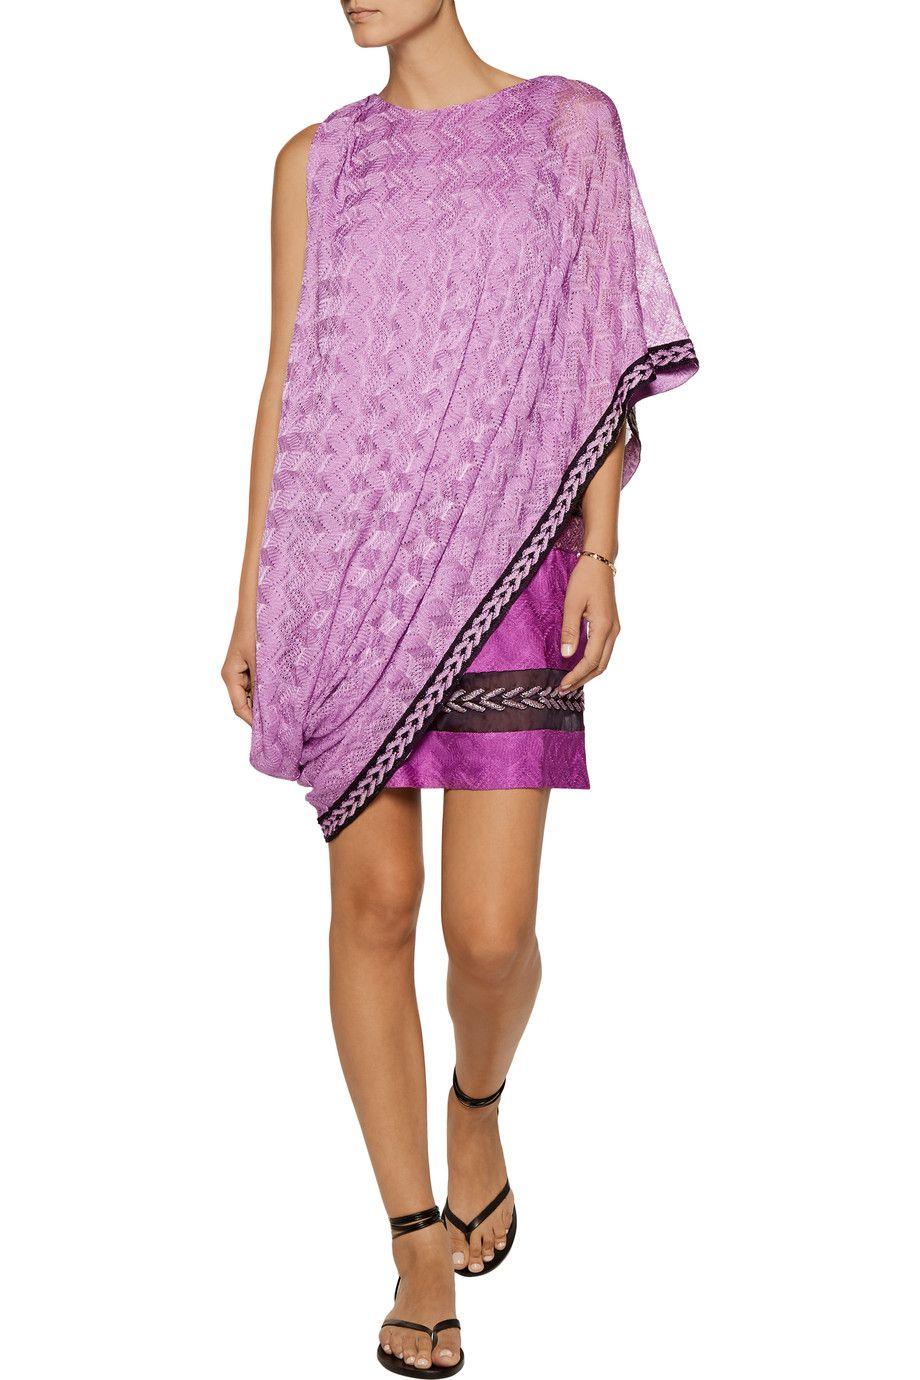 Stunning MISSONI cocktail dress
Signature crochet knit
Finest Rayon-Silk blend
Beautiful hand-beaded glass embellishments
Peferct for a special occassion
Draping over the shoulder
Hook fastenings along shoulder, concealed hook and zip fastening at